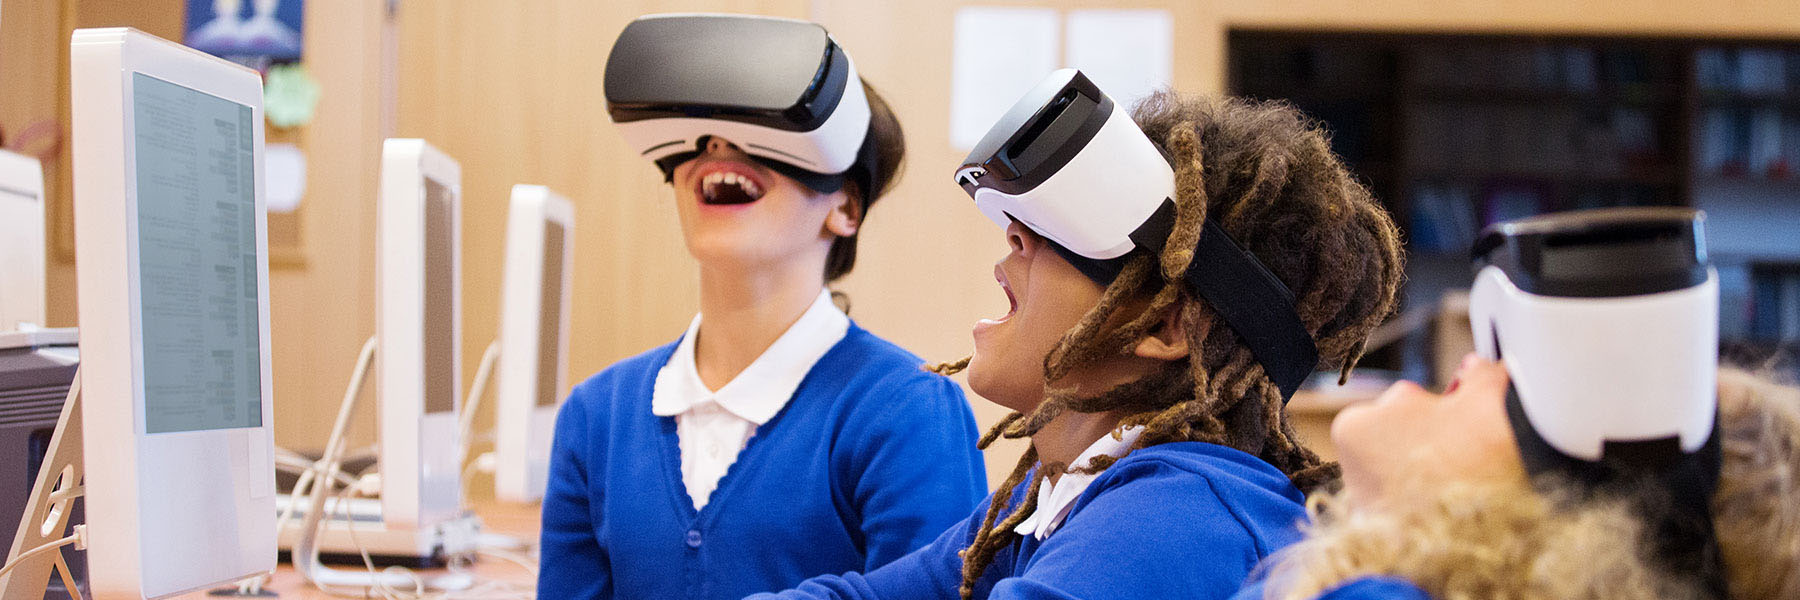 Kids playing with virtual reality headsets in a computer lab